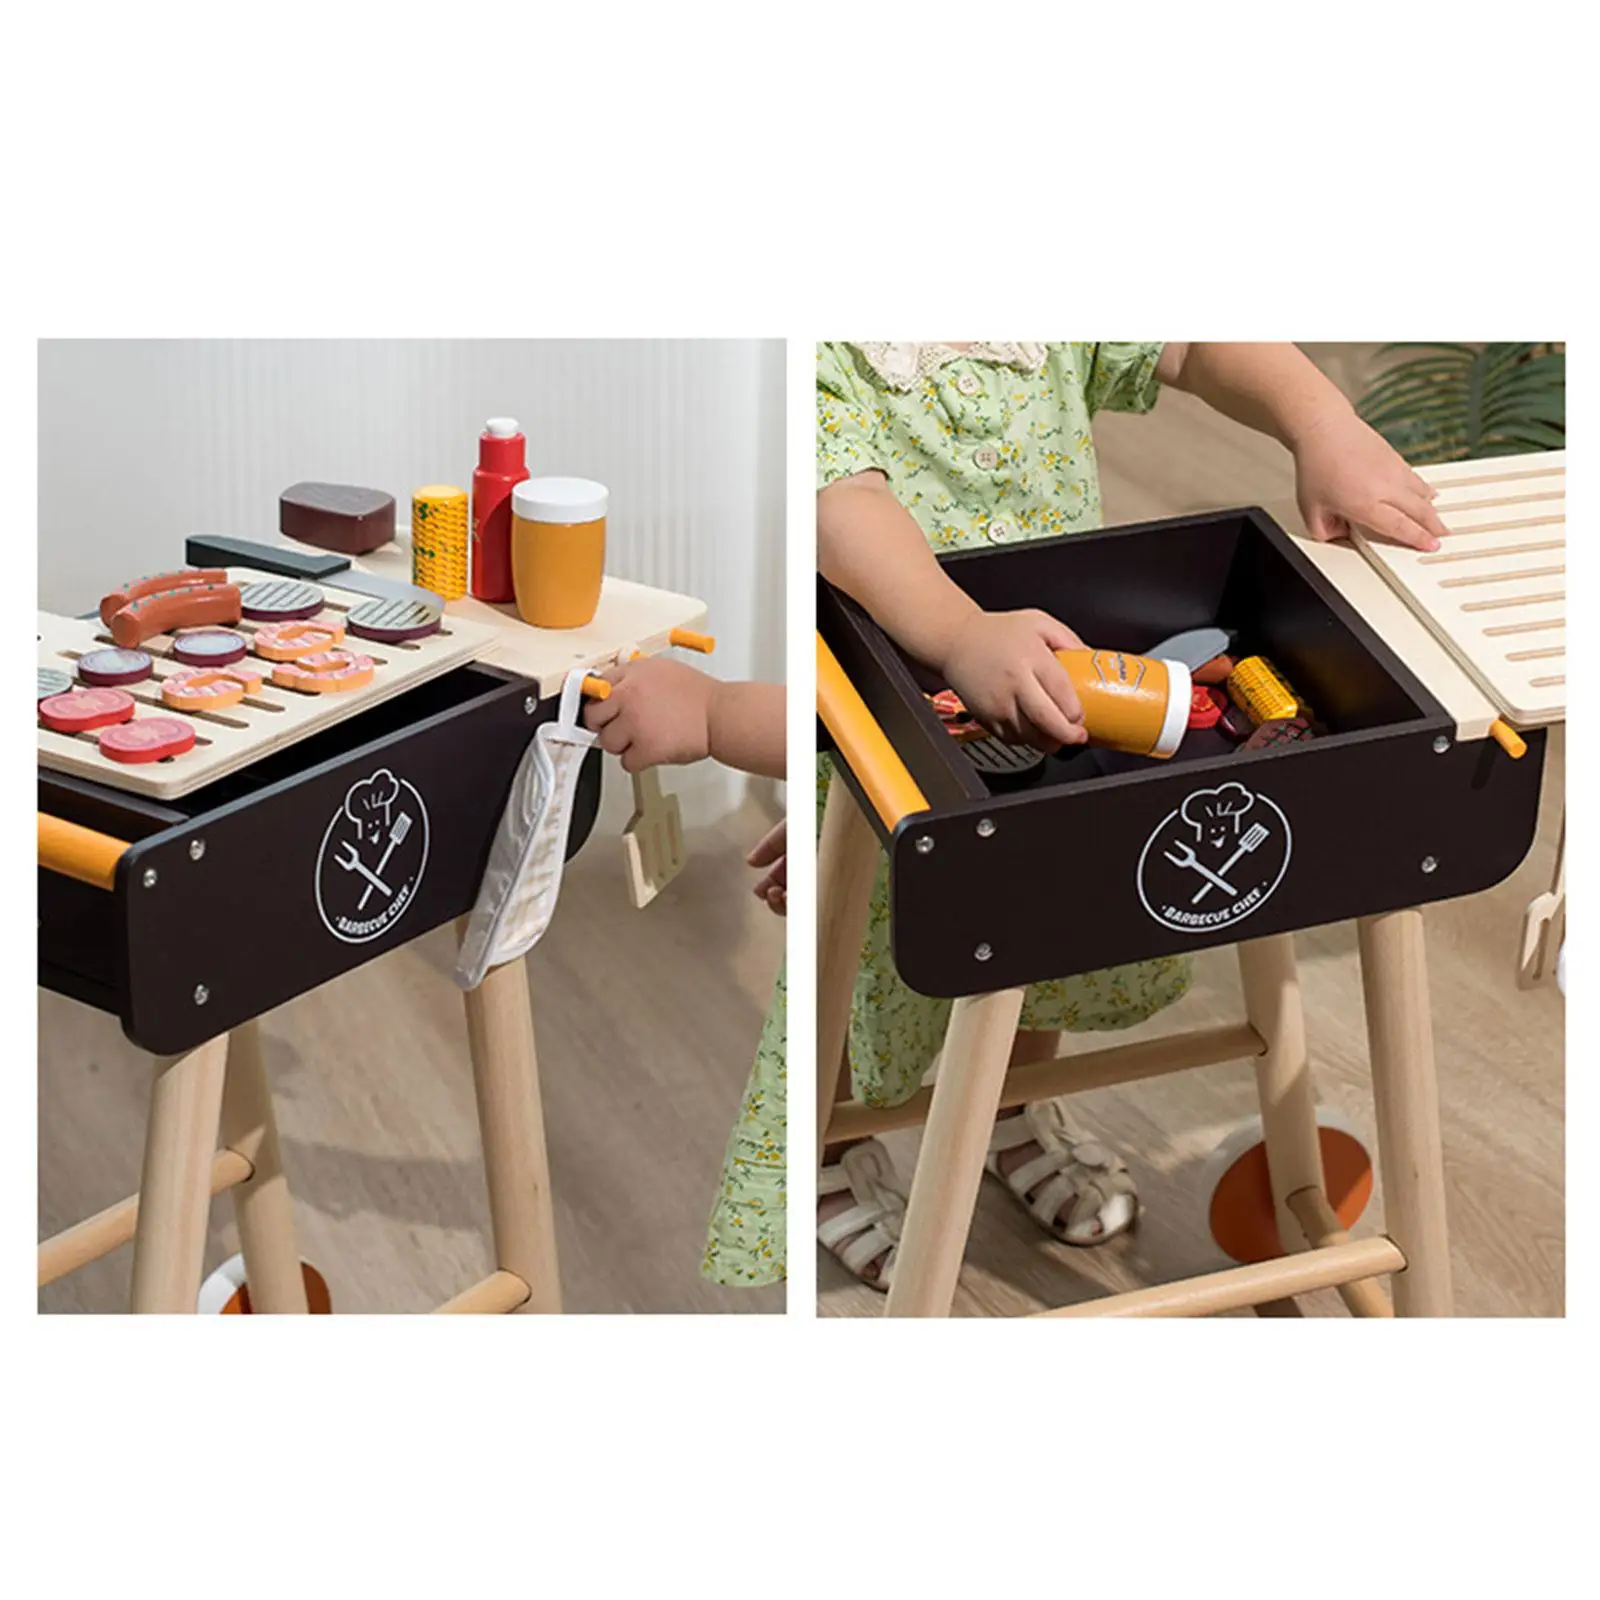 Realistic Wooden Toy BBQ Set Role Playing Toy Learning Educational Toy Barbecue Grill Toy Cooking Playset for Boy Girls Kids